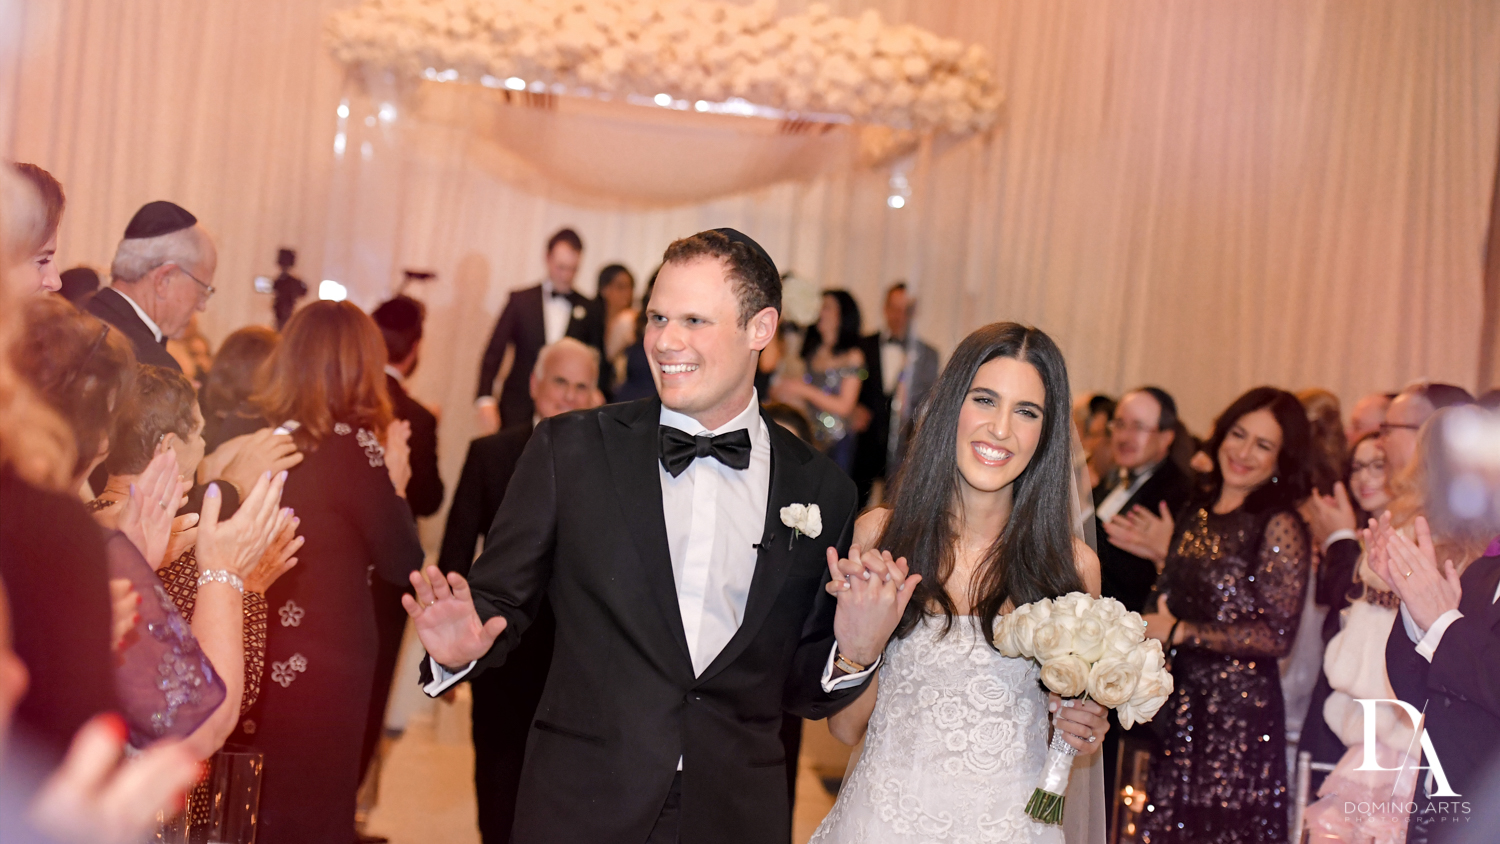 just married at A Ritz Carlton Wedding in Key Biscayne by Domino Arts Photography